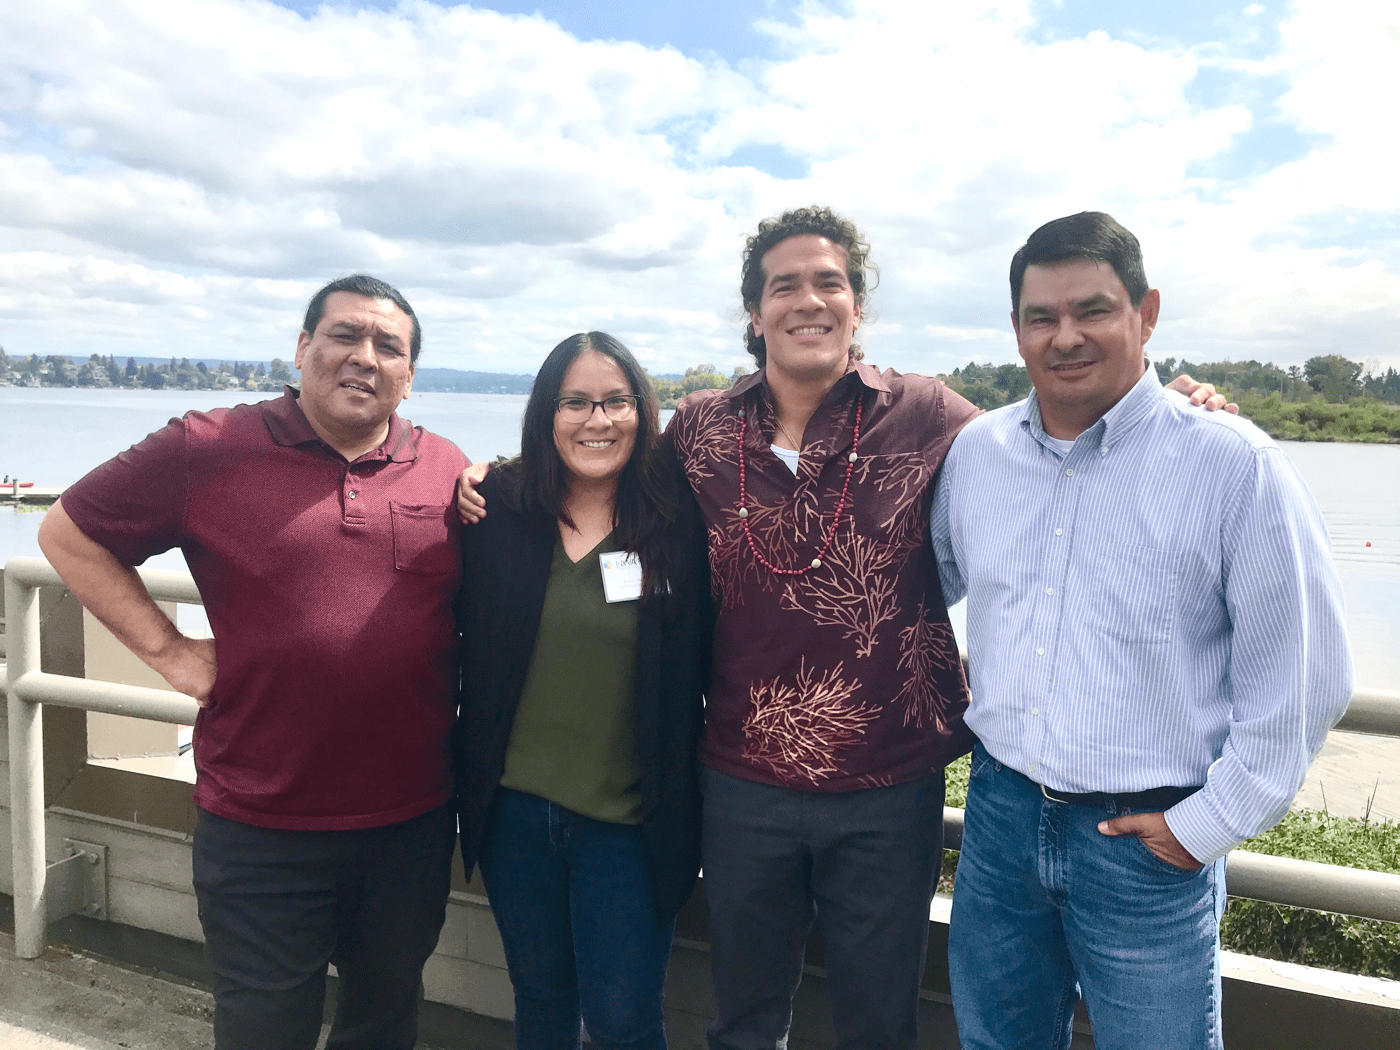 four native americans, three men, one woman, stand next to each other smiling at the camera, with a lake and lush landscape behind them